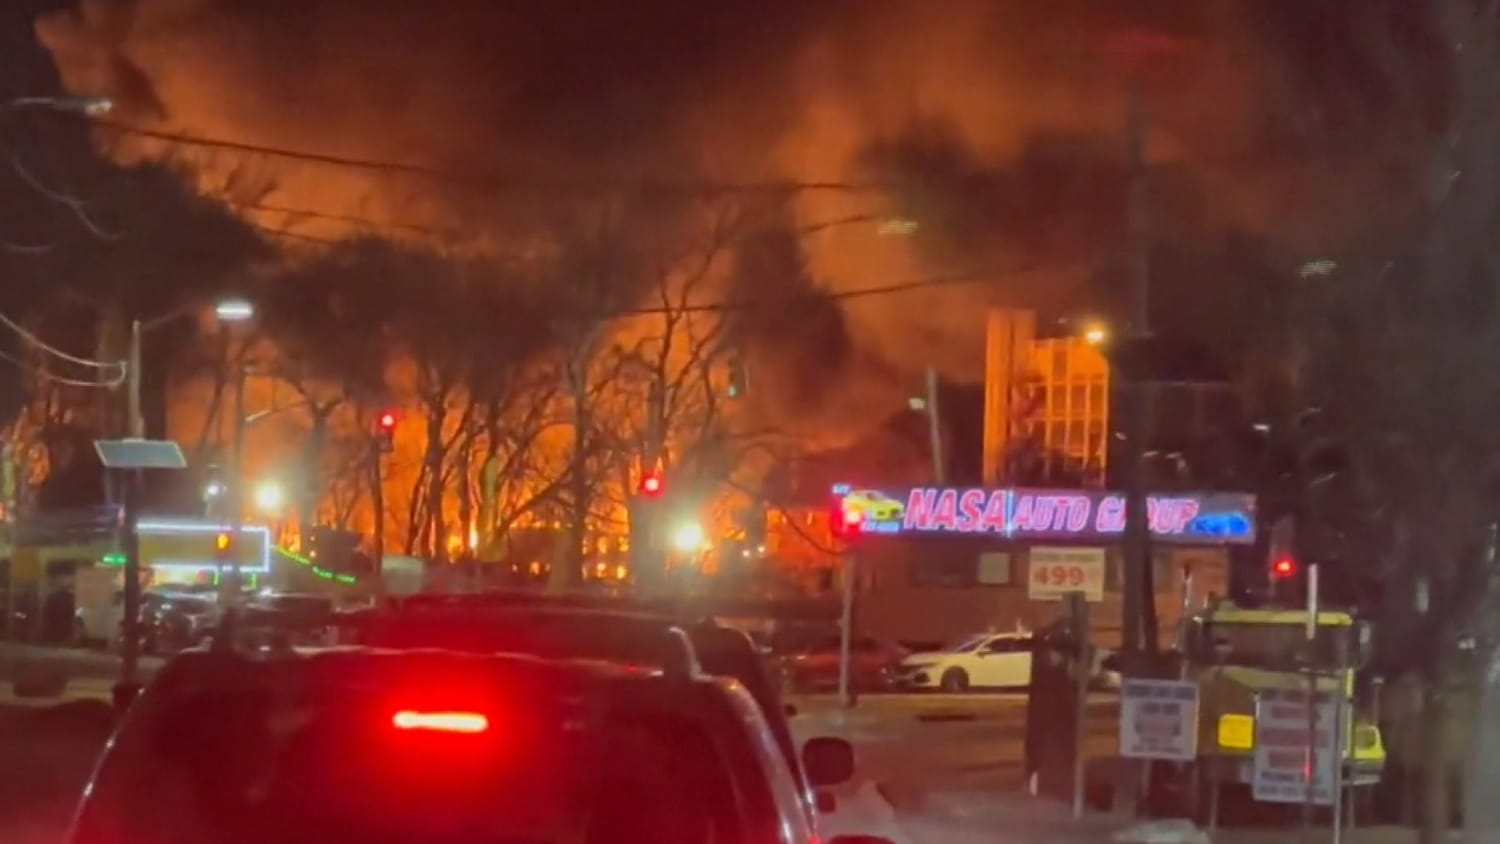 Blaze at chemical plant in Passaic, N.J. continues to burn; firefighter injured